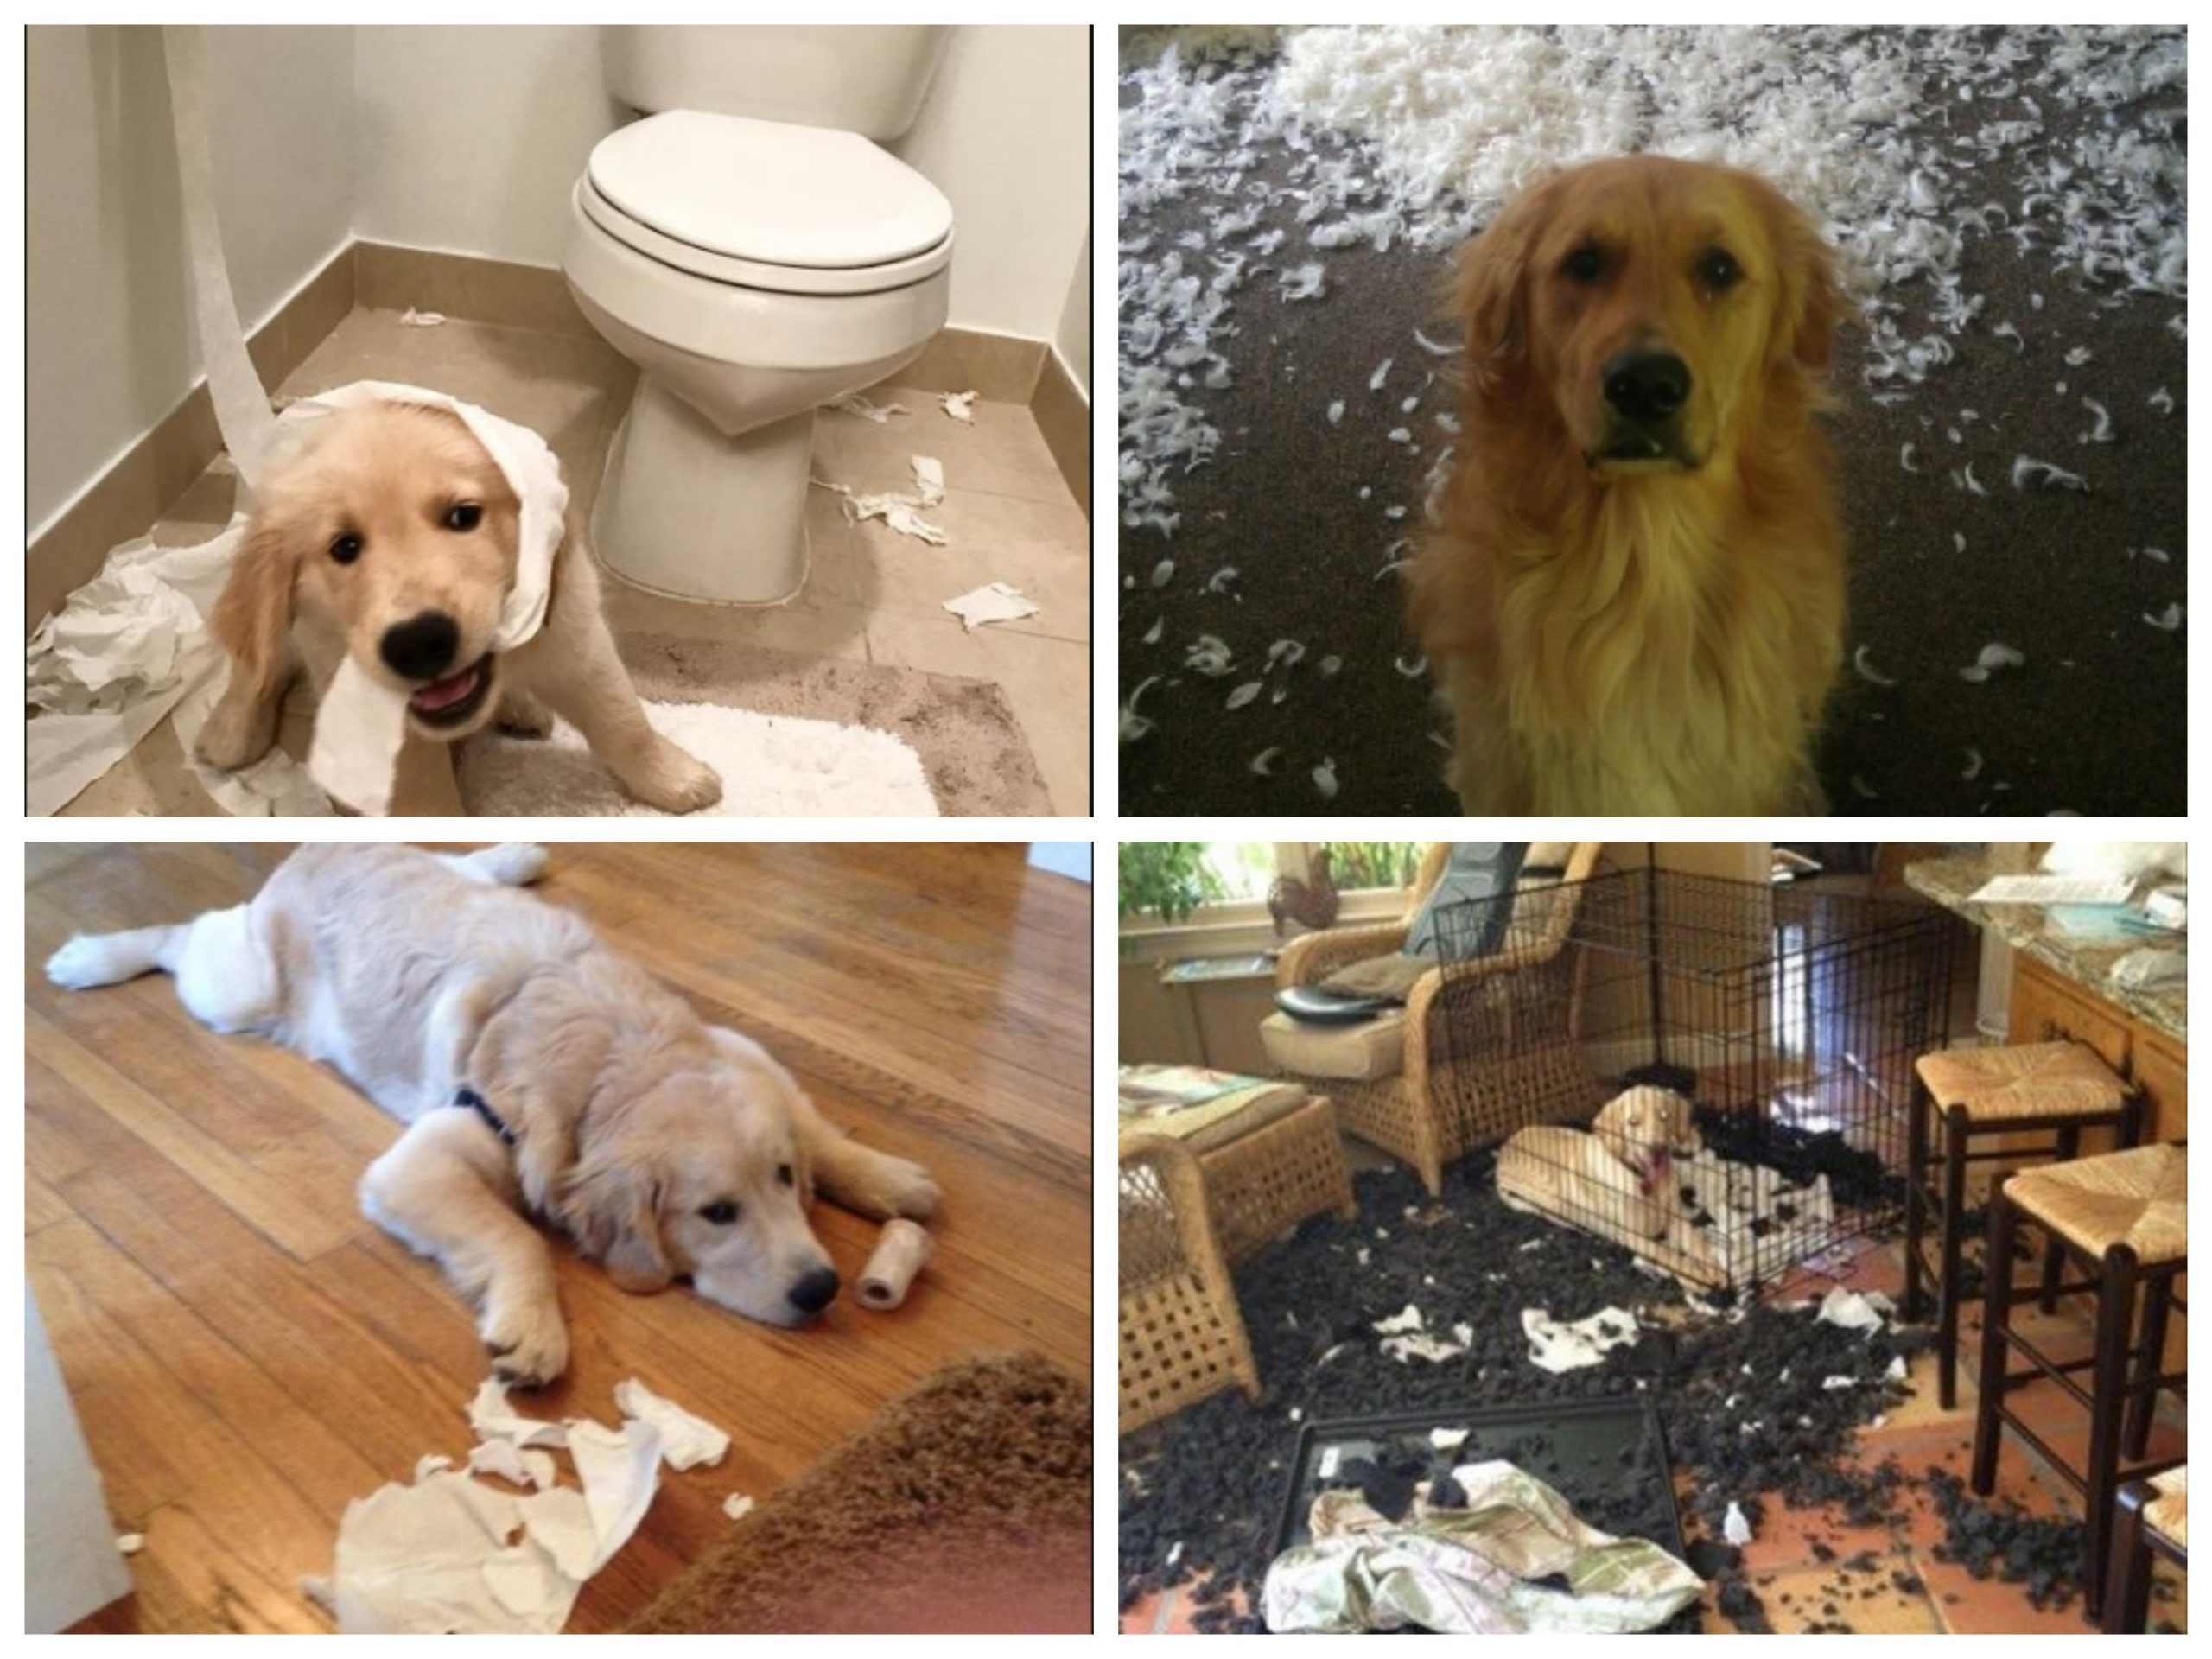 The Owners Of These Golden Retrievers Must Have Strong Nerves. Here’s Why